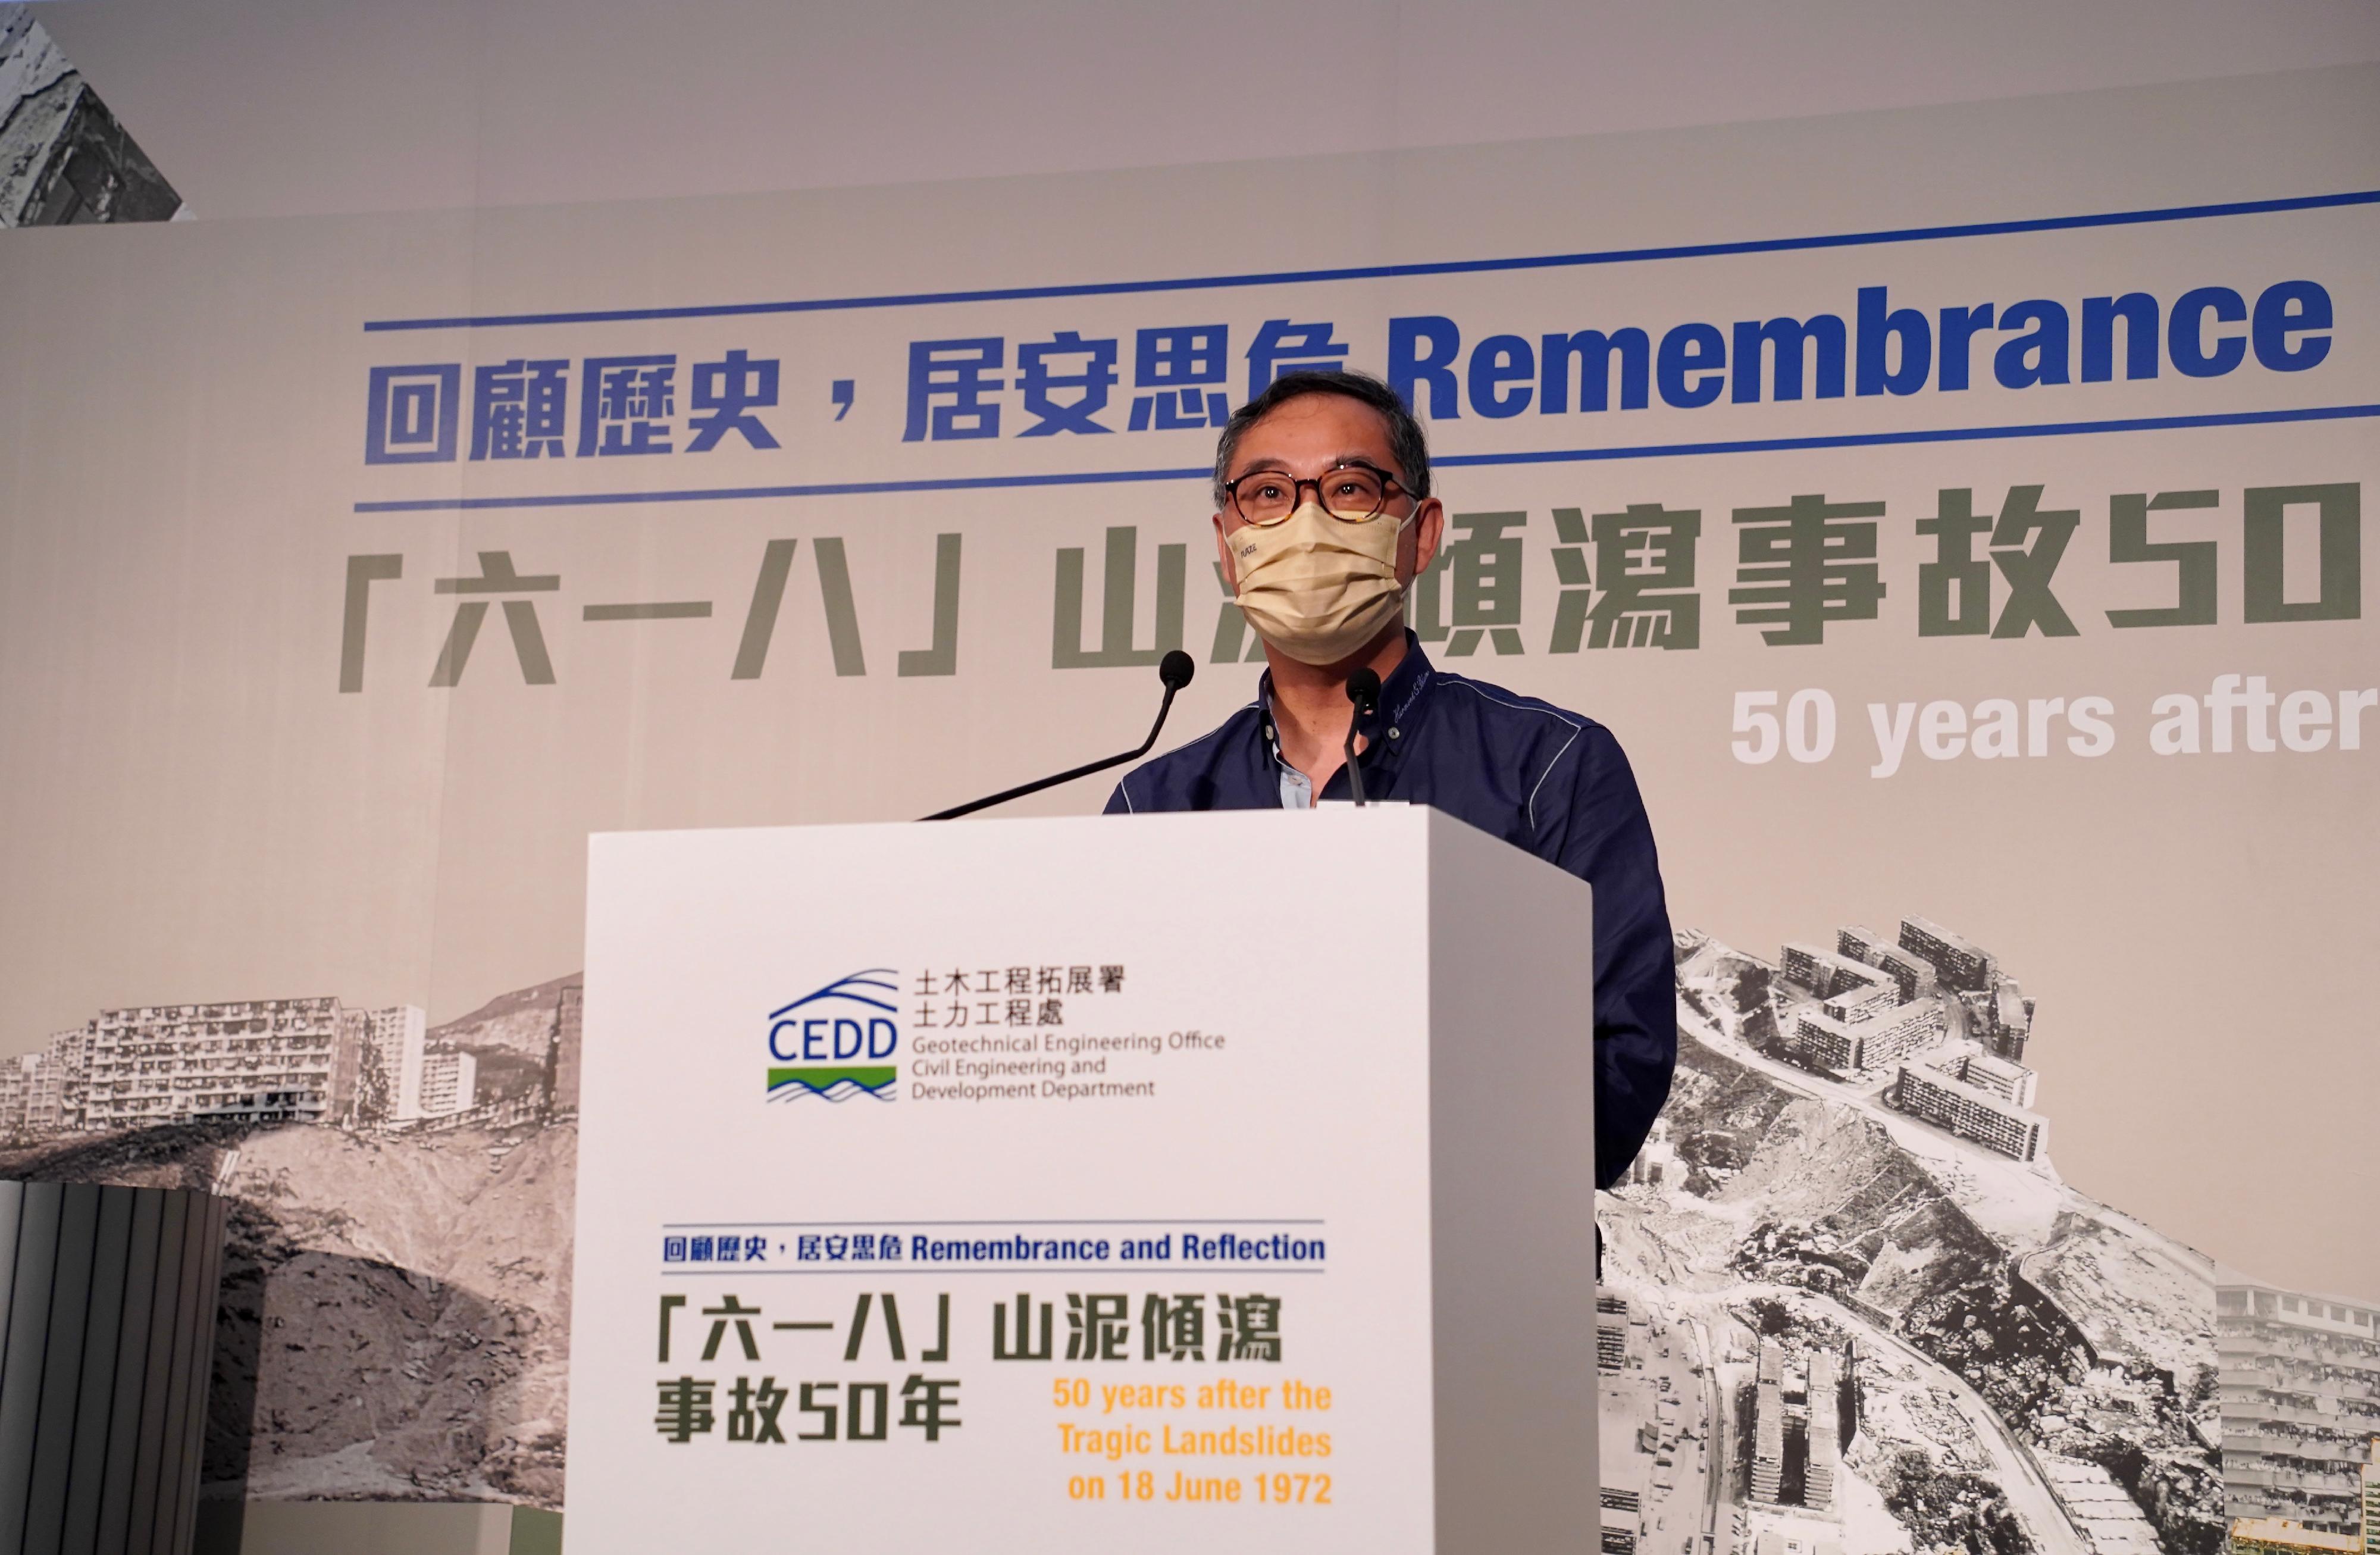 The Geotechnical Engineering Office (GEO) of the Civil Engineering and Development Department today (June 3) held the launch ceremony of the commemorative campaign Remembrance and Reflection: 50 years after the Tragic Landslides on 18 June 1972 at Tai Kwun. Photo shows the Permanent Secretary for Development (Works), Mr Ricky Lau, addressing the ceremony.